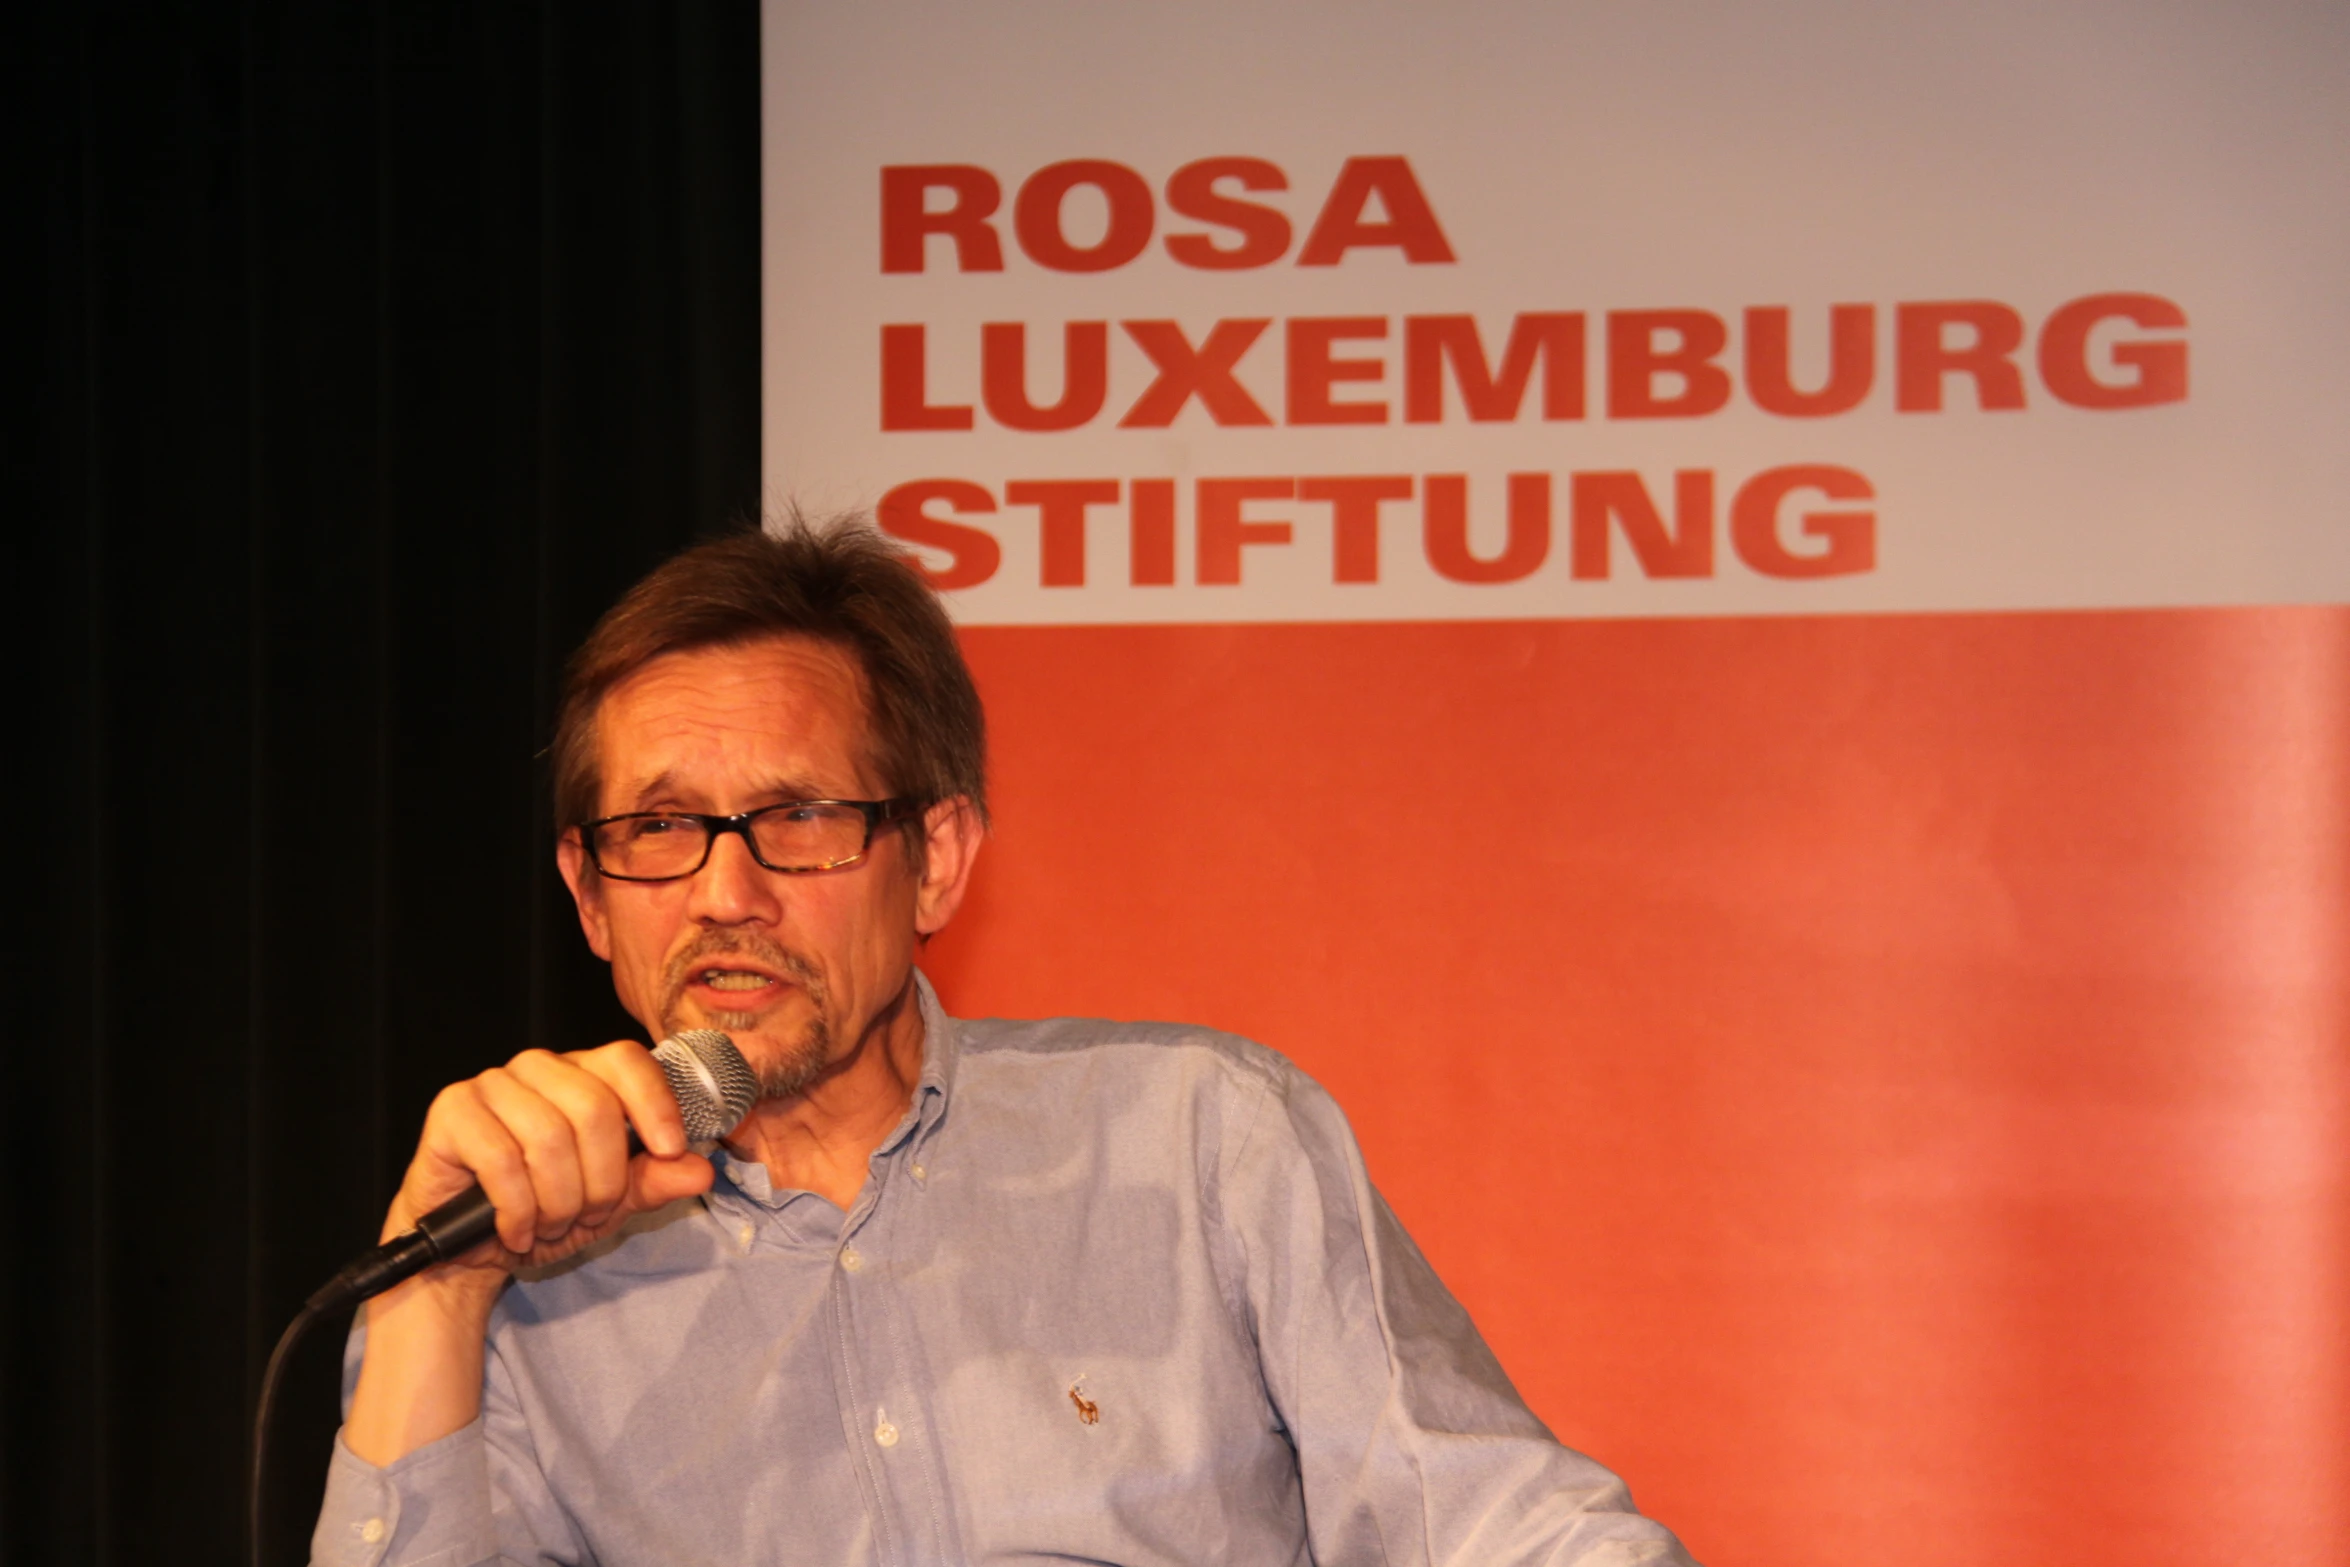 a man is holding a microphone and talking on a microphone